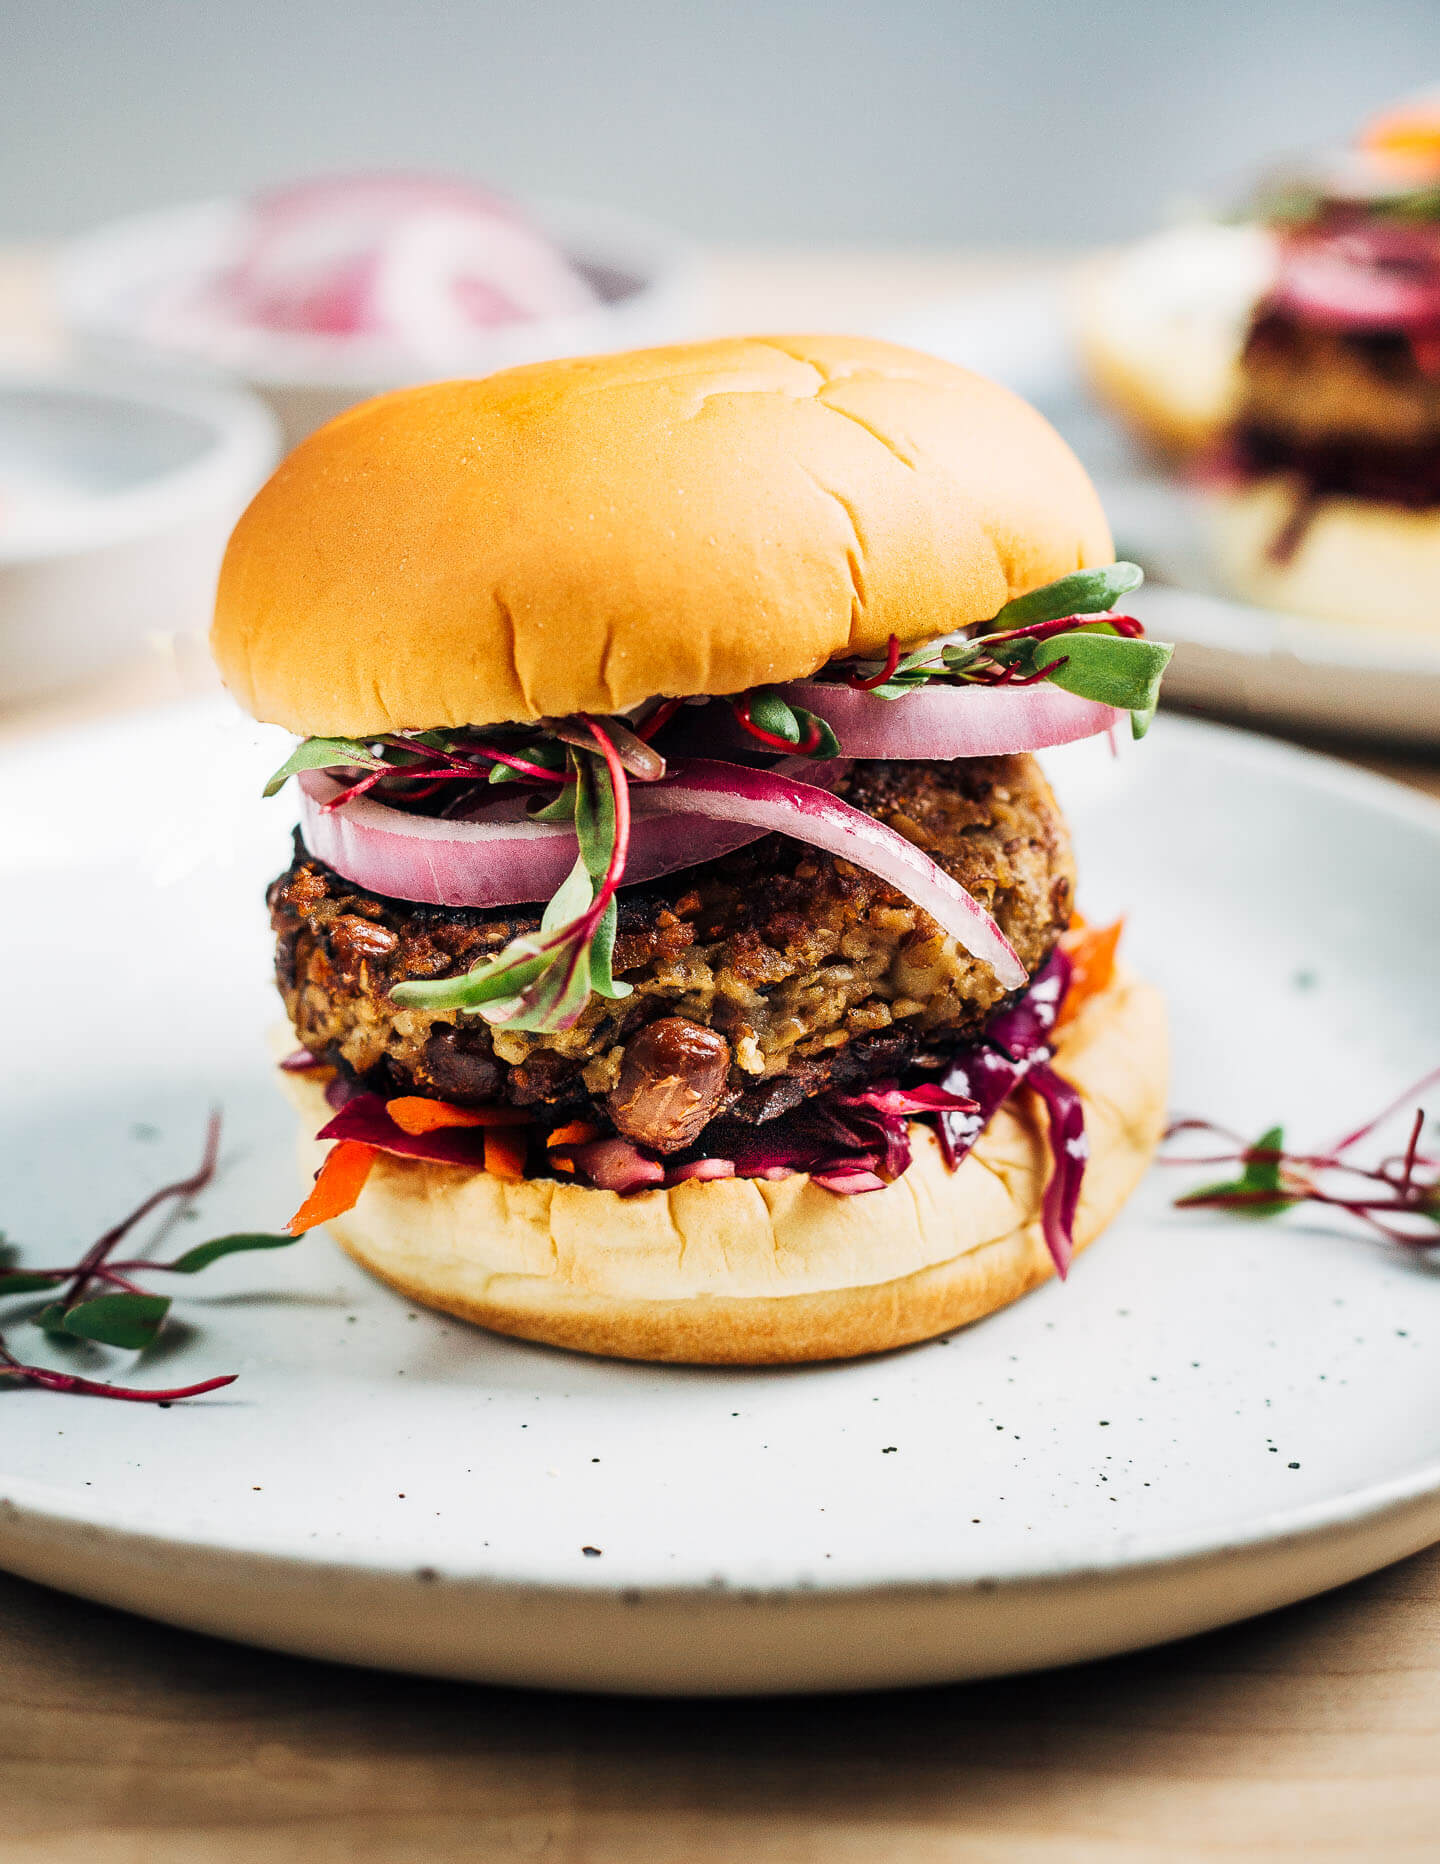 These vegetarian shiitake mushroom and tahini veggie burgers with a savory sweet red cabbage and carrot slaw, quick-pickles, and beet microgreens are a super flavorful, wonderfully satisfying dinner option. 